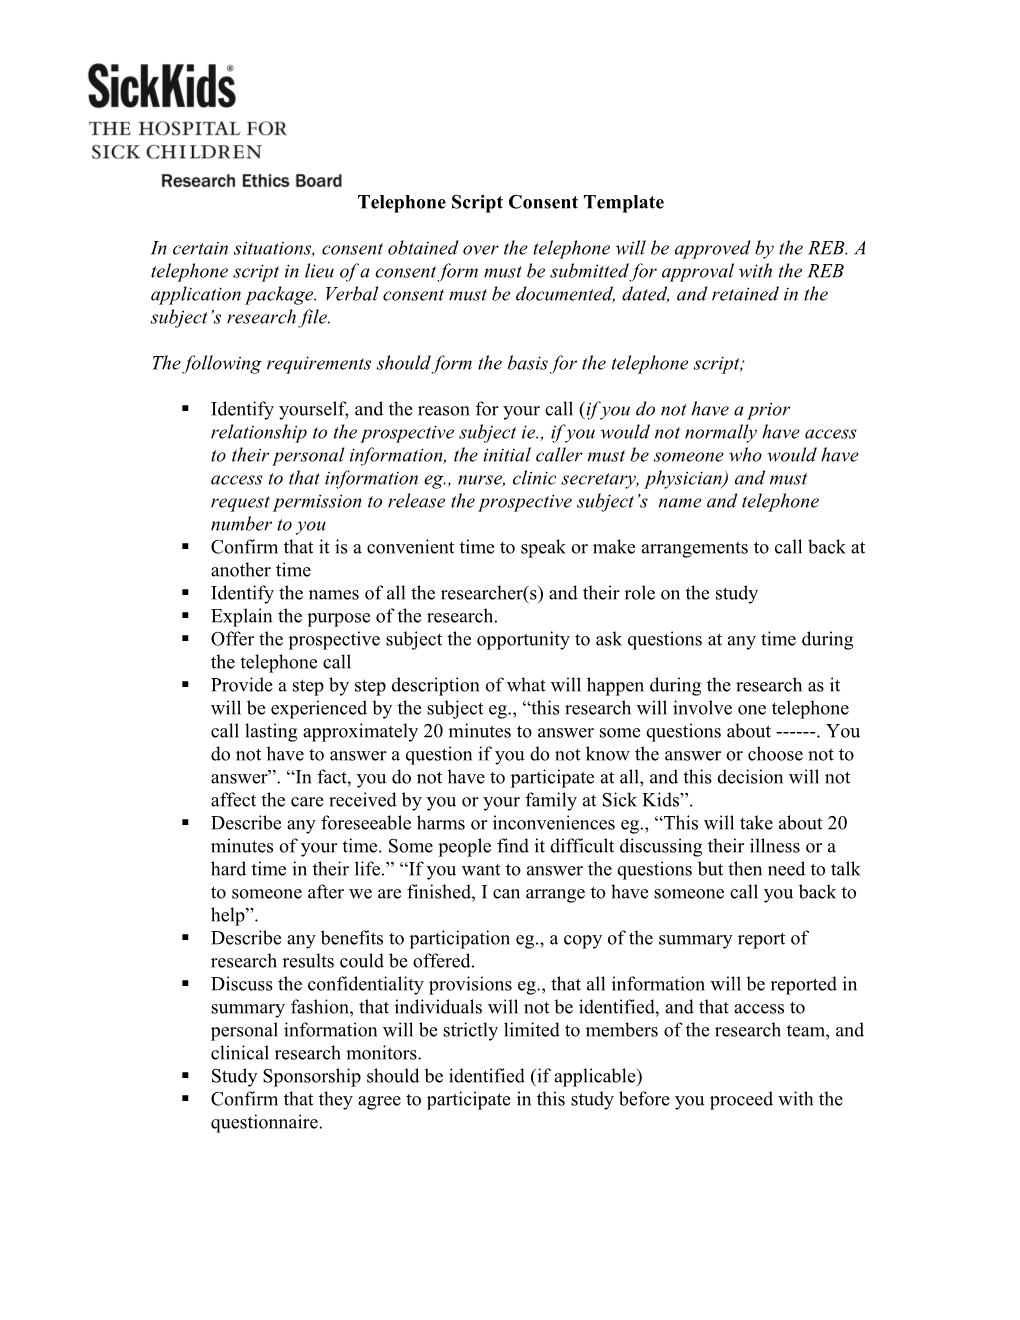 Consent Form Template for Retrospective Research Projects (July 2005)